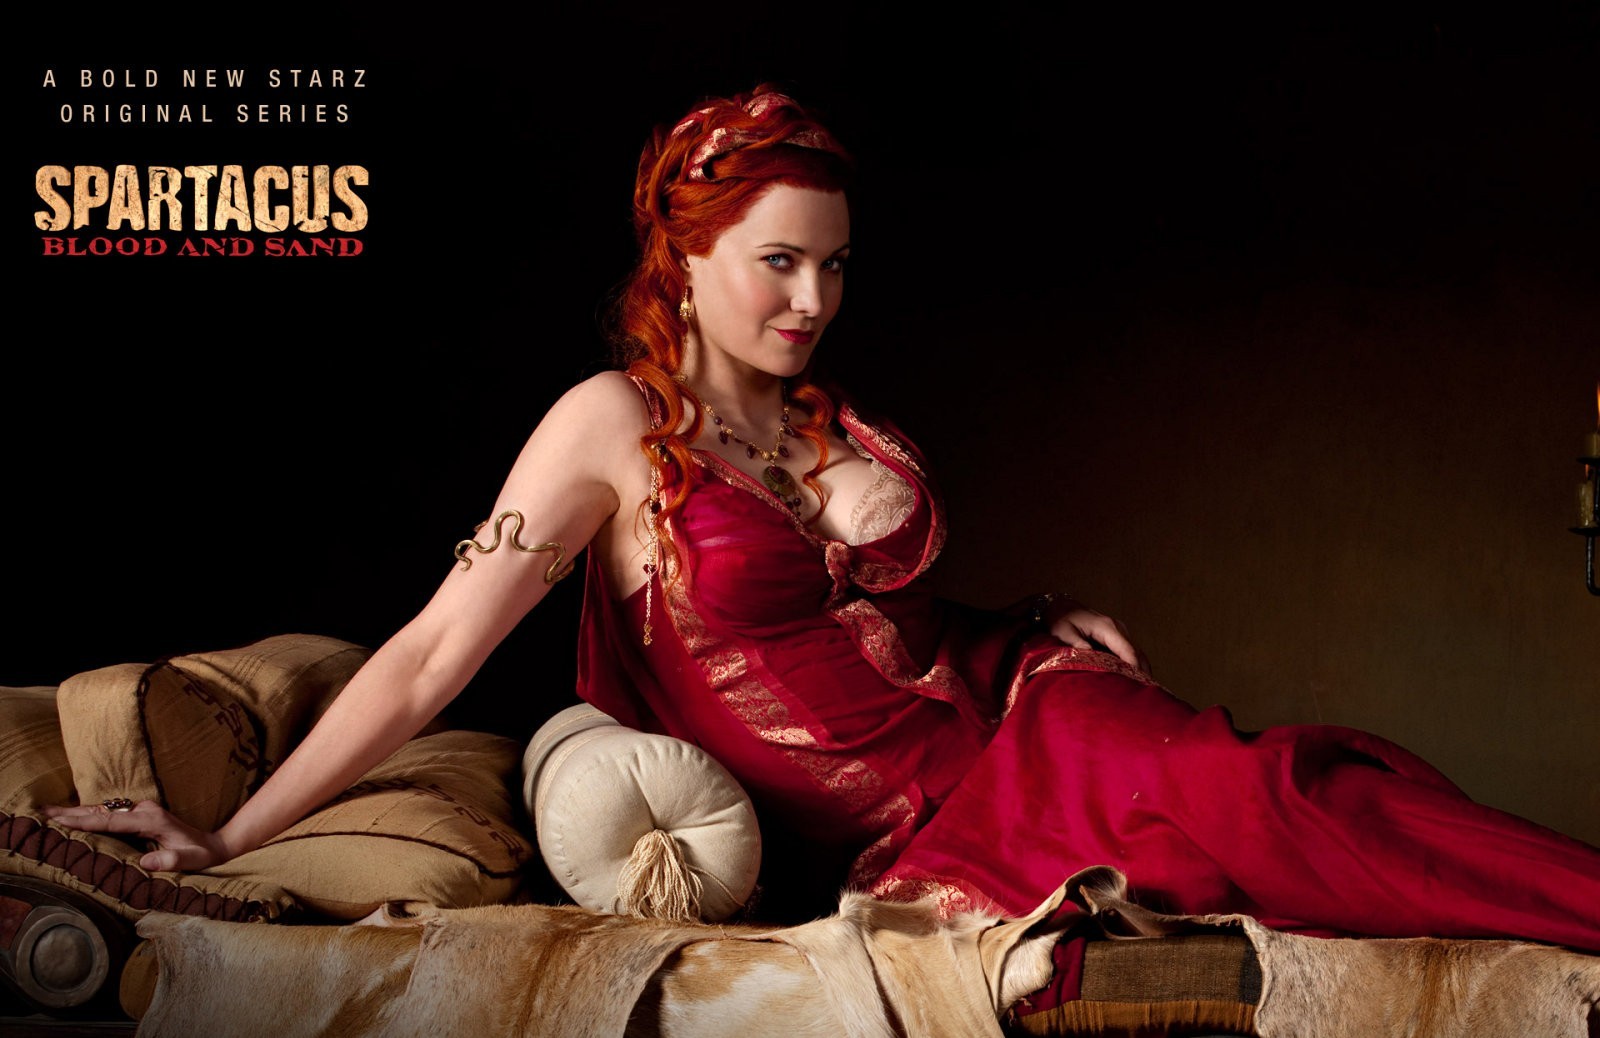 bev collum recommends lucy lawless spartacus scene pic